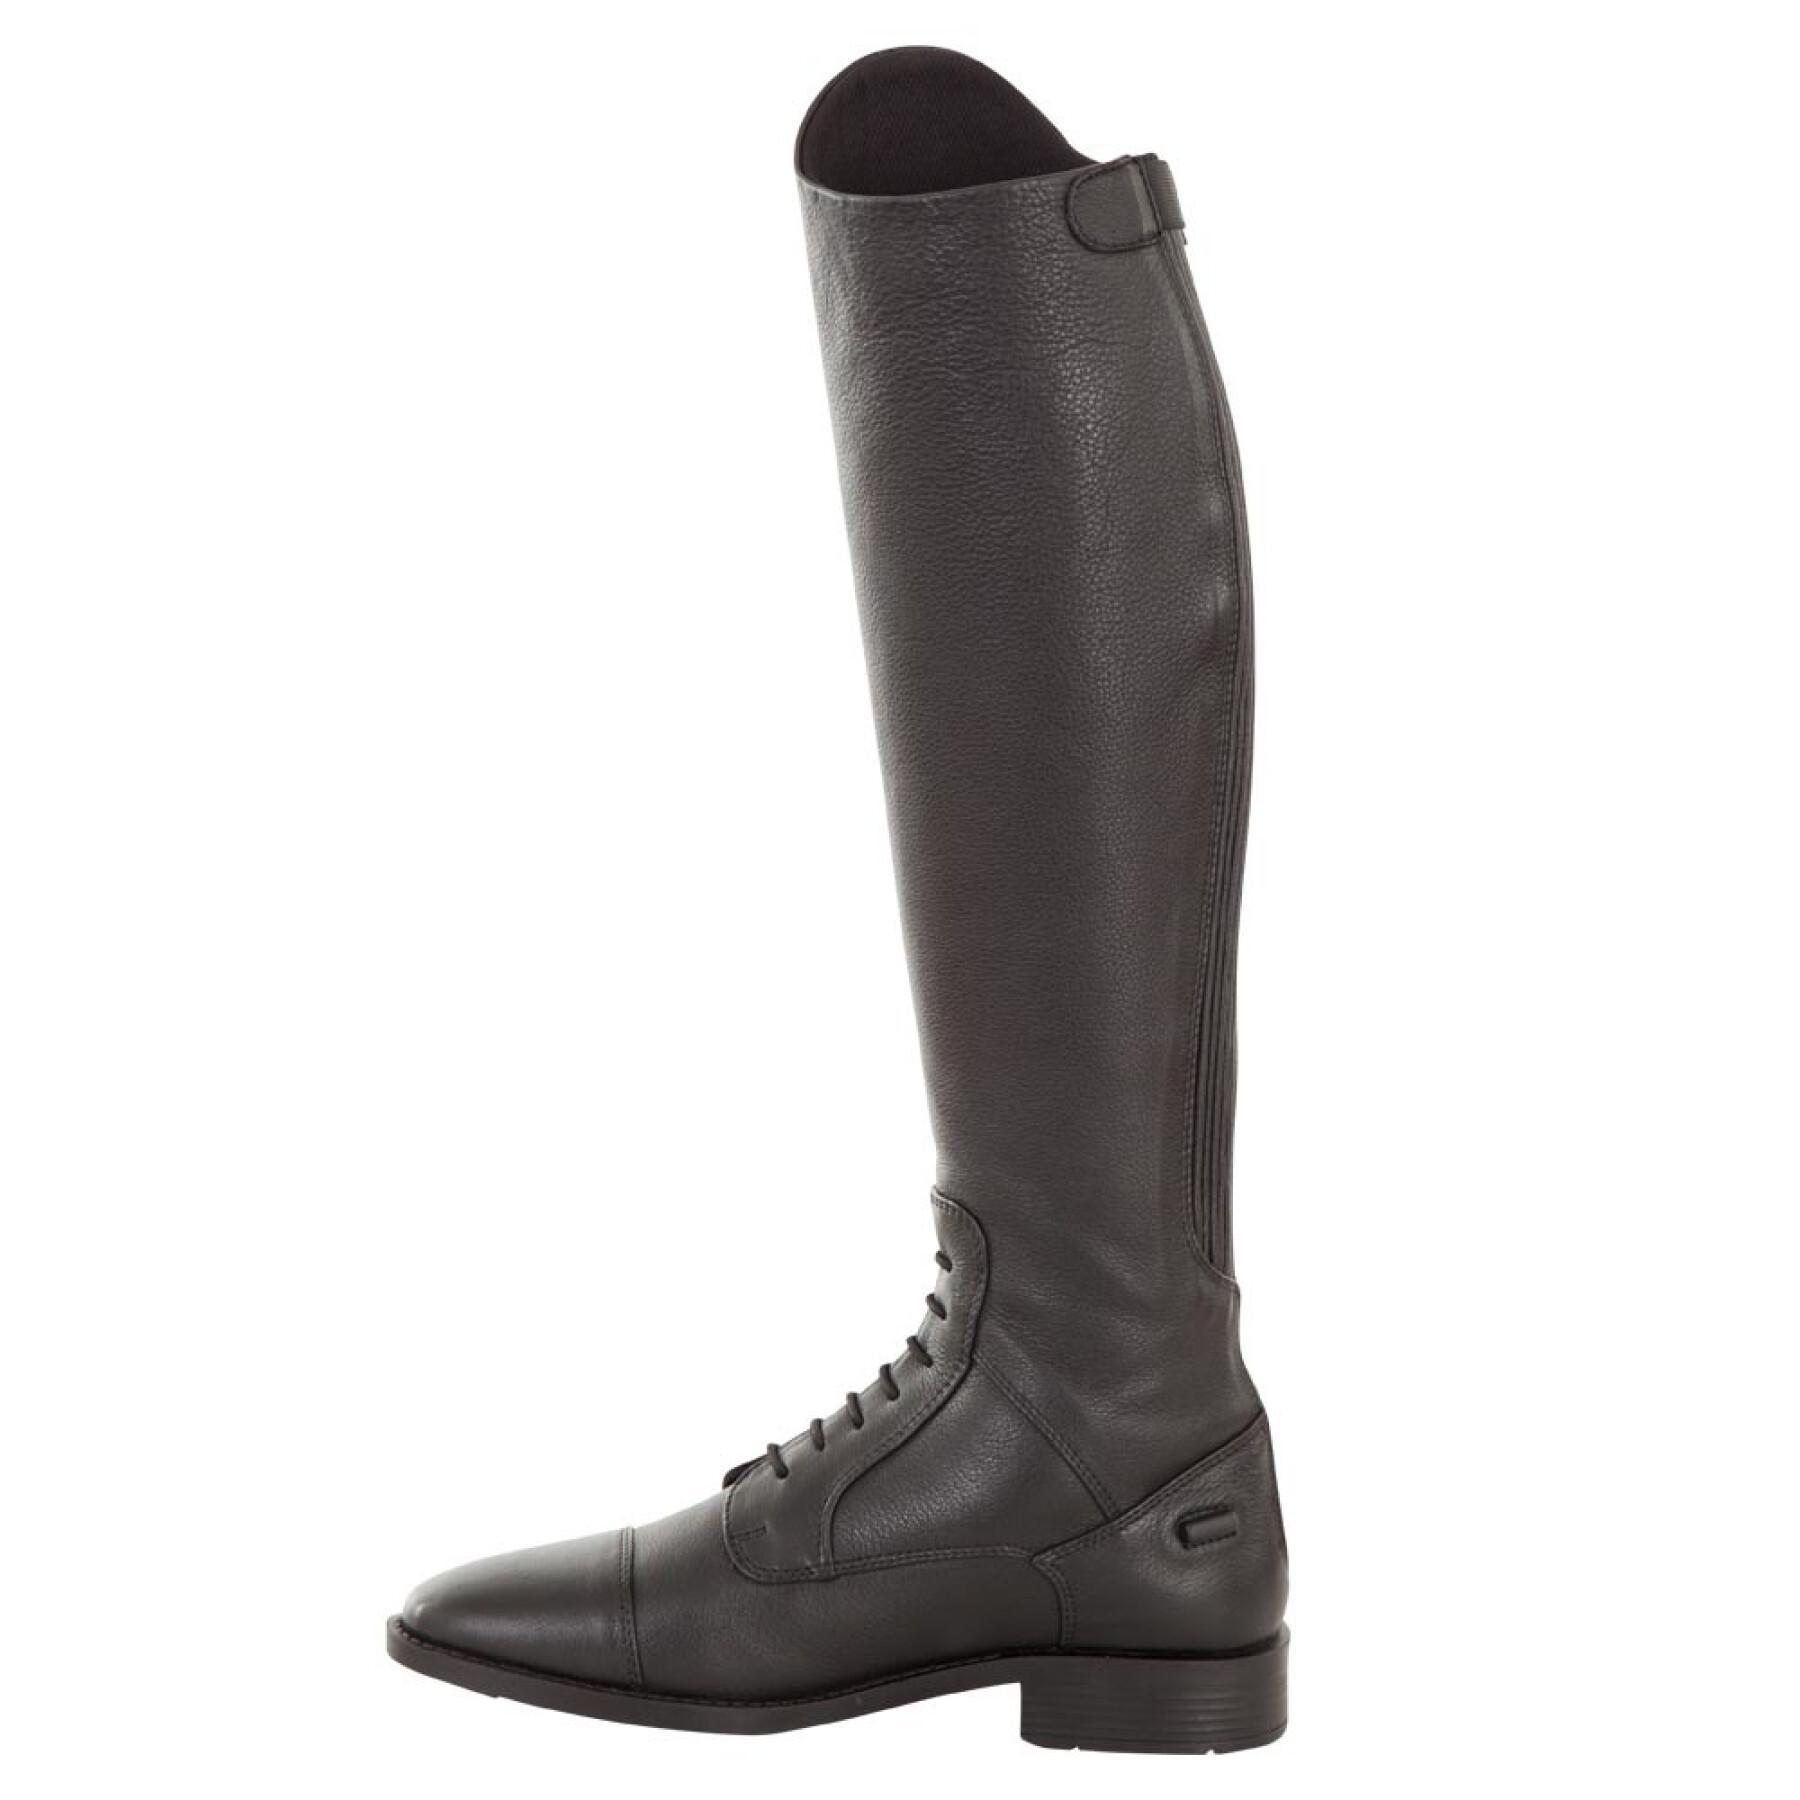 Leather riding boots Premiere Saco